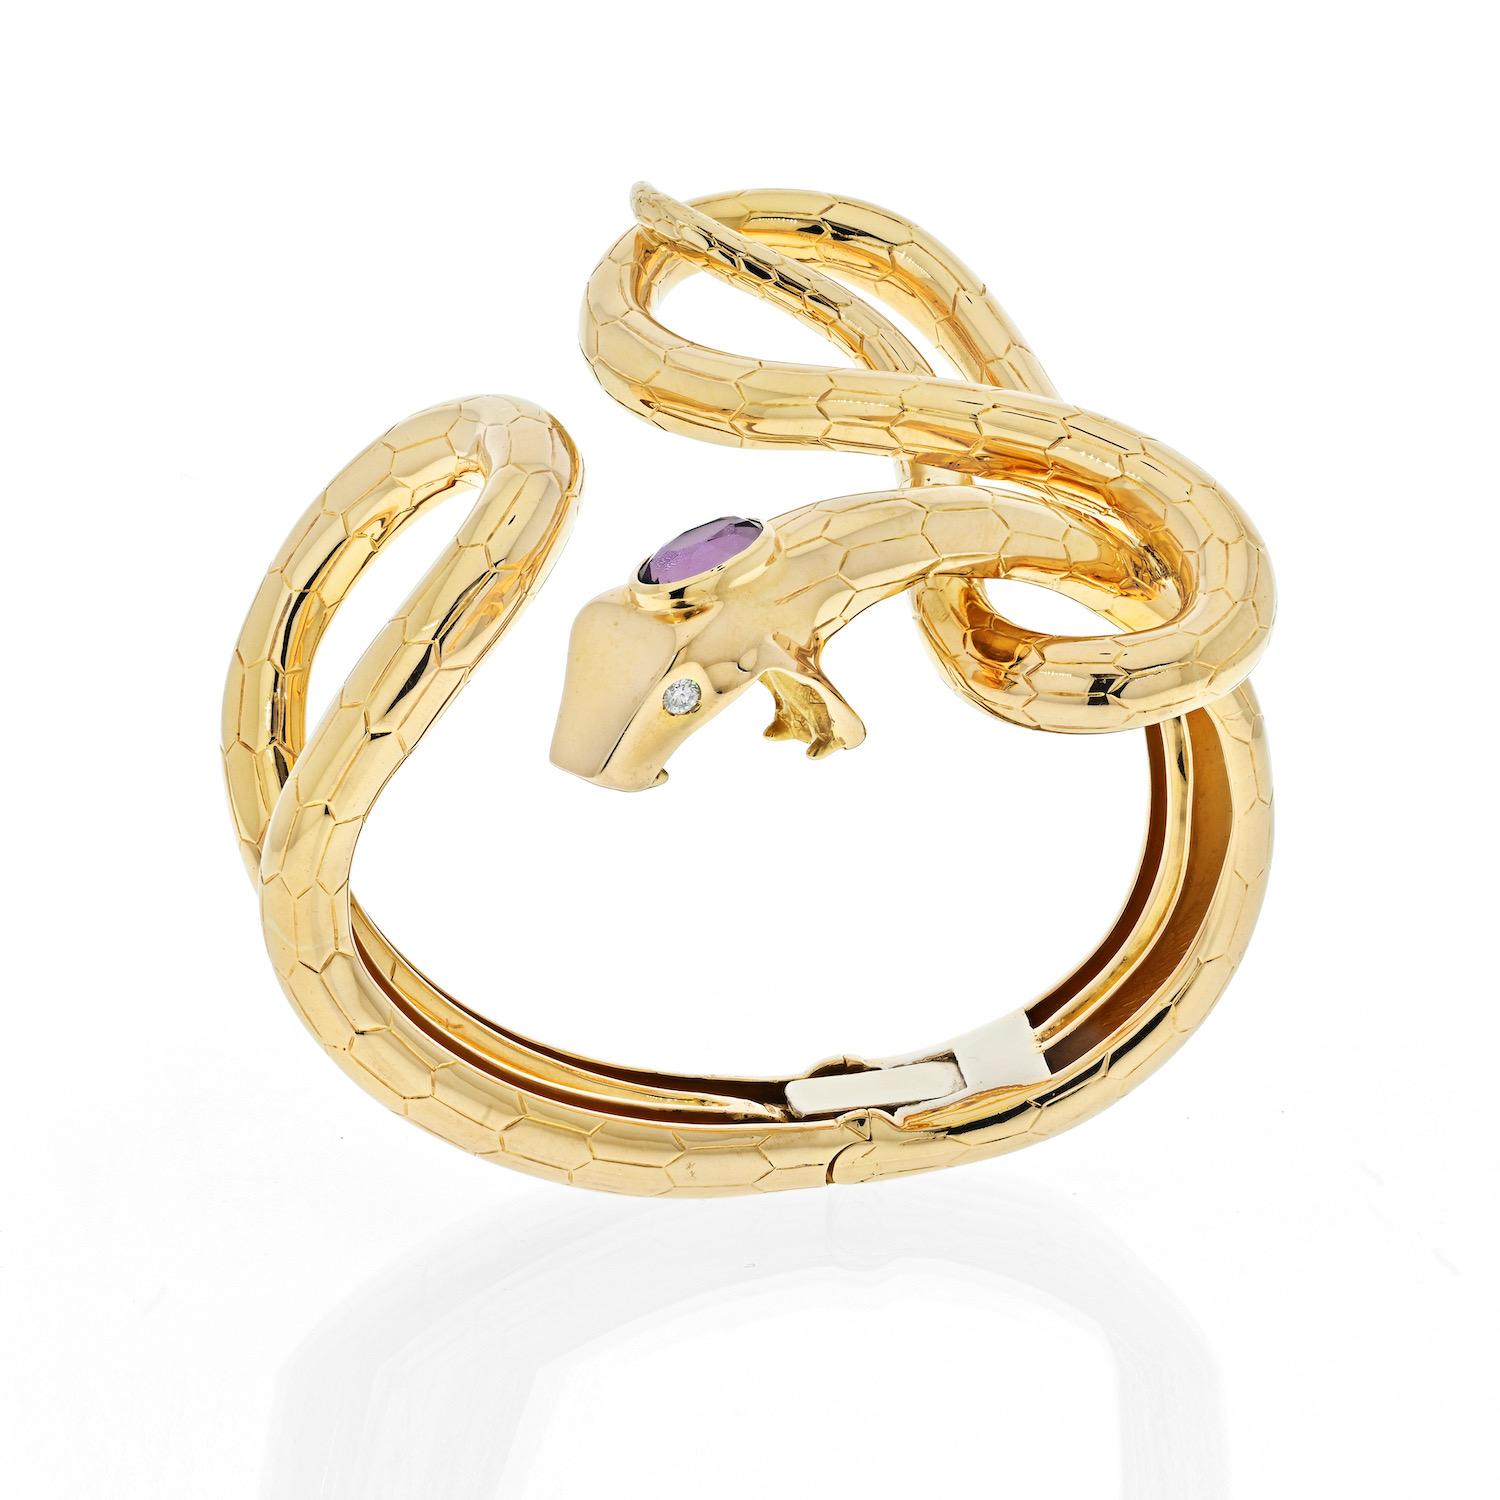 This is a fabolous find: hefty Snake Hinged Cuff Bracelet by Gucci. The articulated arm cuff is designed as a snake set with amethyst atop of it's head and the eyes are set with round cut diamonds. This chic and contemporary Gucci bracelet can be